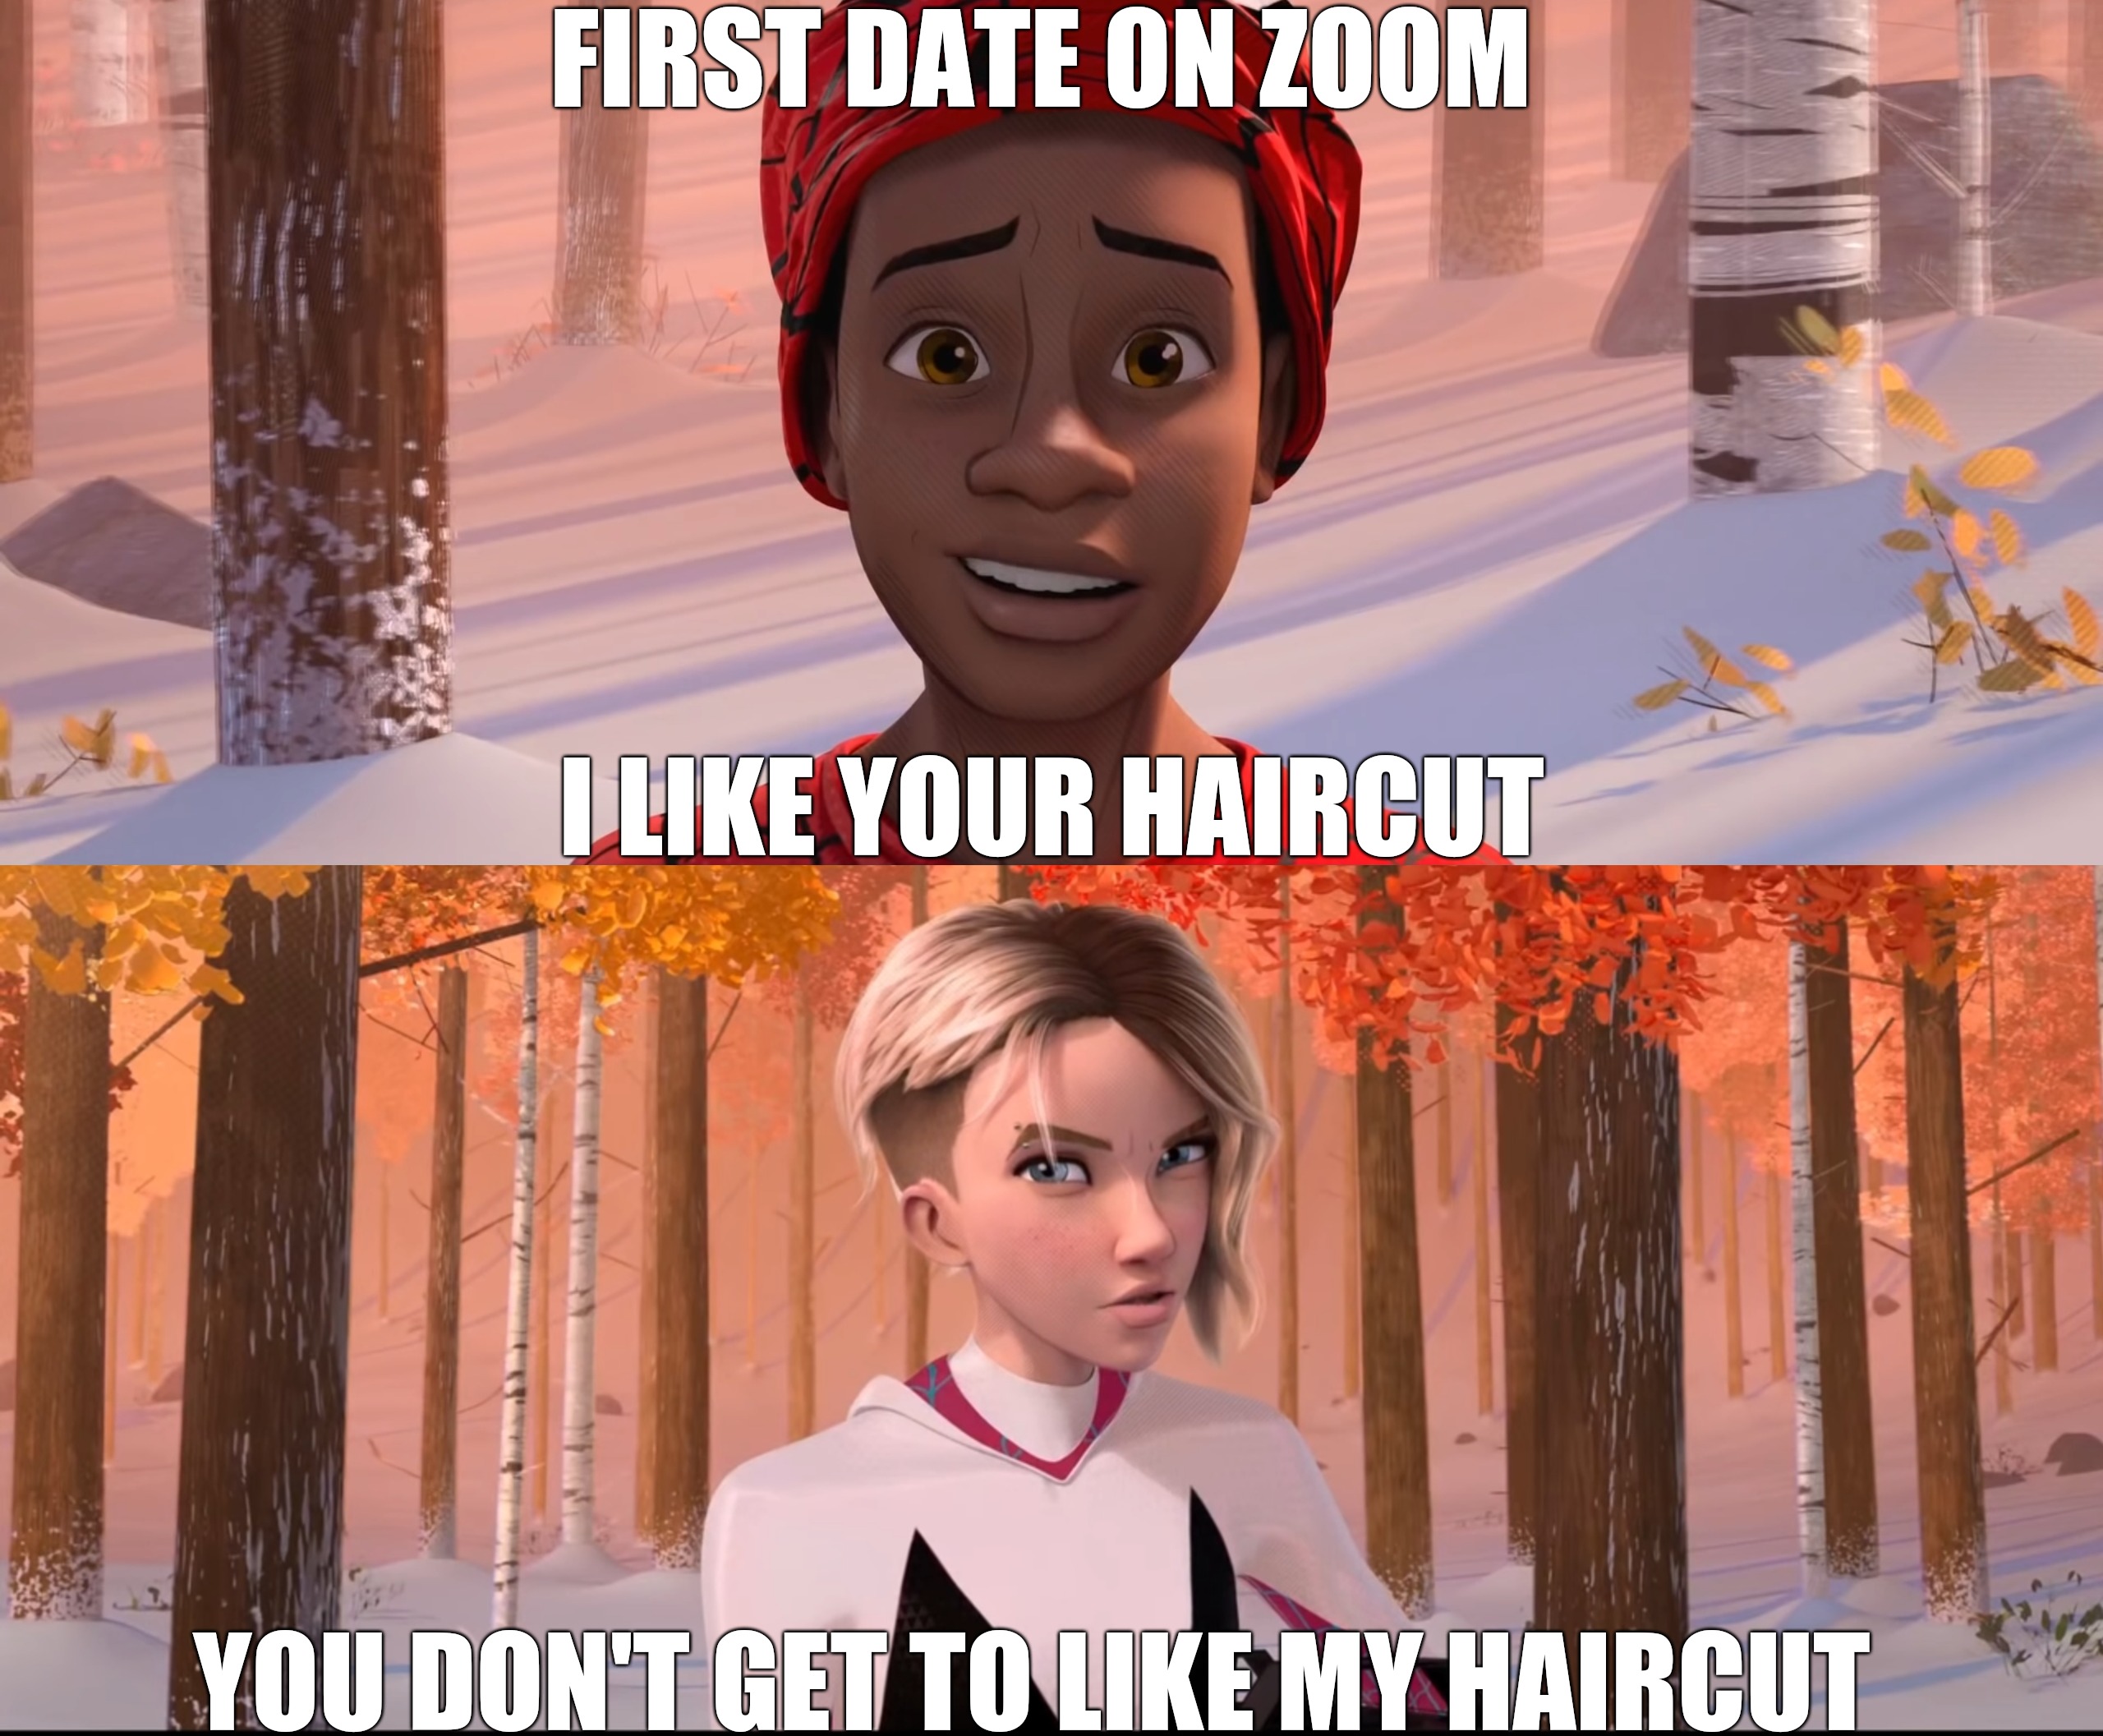 Spider Date | FIRST DATE ON ZOOM; I LIKE YOUR HAIRCUT; YOU DON'T GET TO LIKE MY HAIRCUT | image tagged in memes,funny,zoom,spiderman,spider-verse meme,dating | made w/ Imgflip meme maker